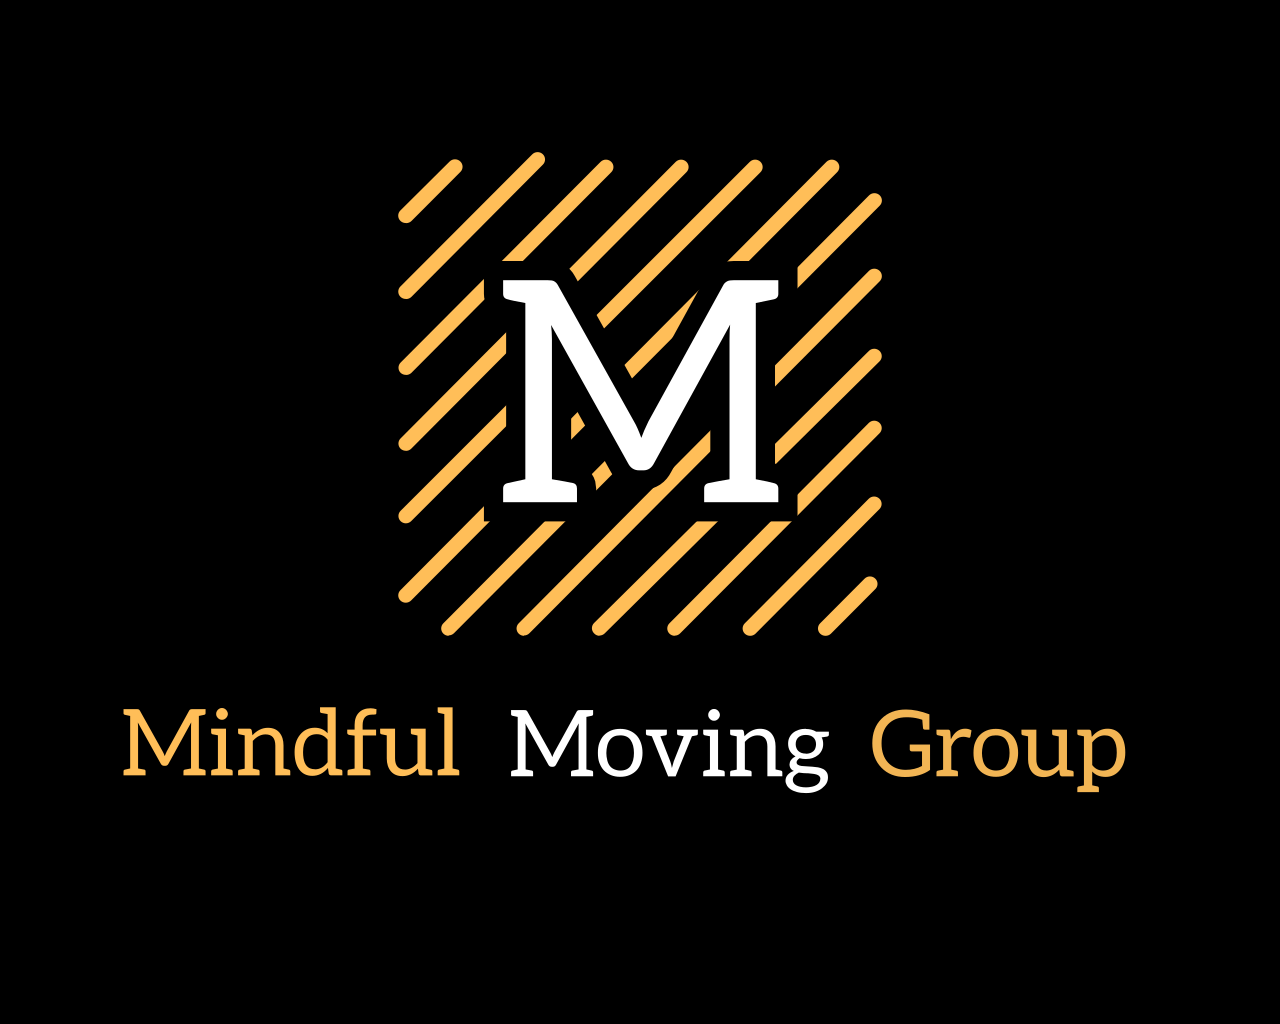 Mindful Moving Group